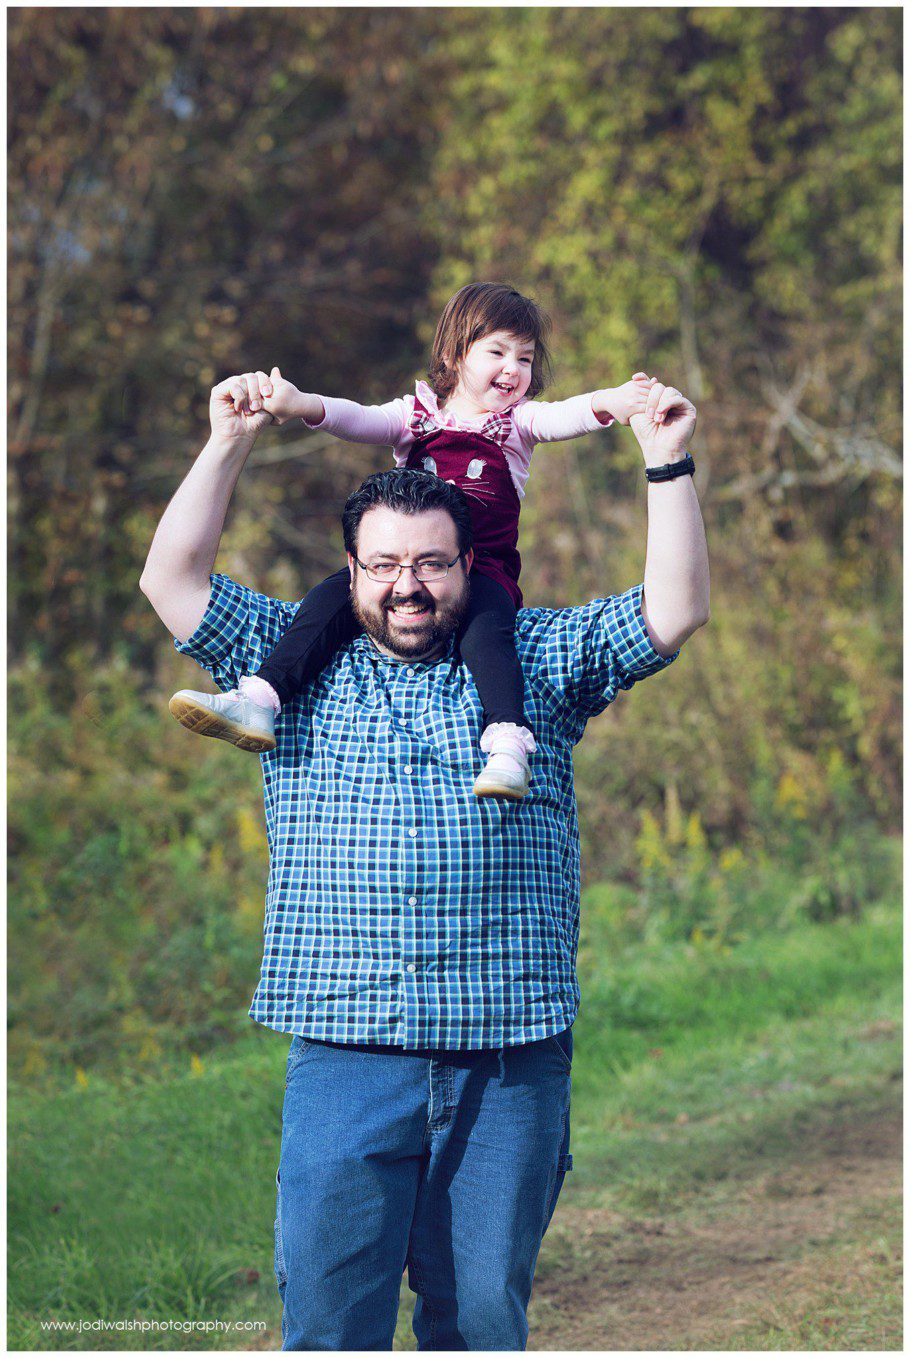 image of a dad with his toddler daughter riding on his shoulders. He's wearing glasses and has a dark beard. They're both grinning and holding hands.